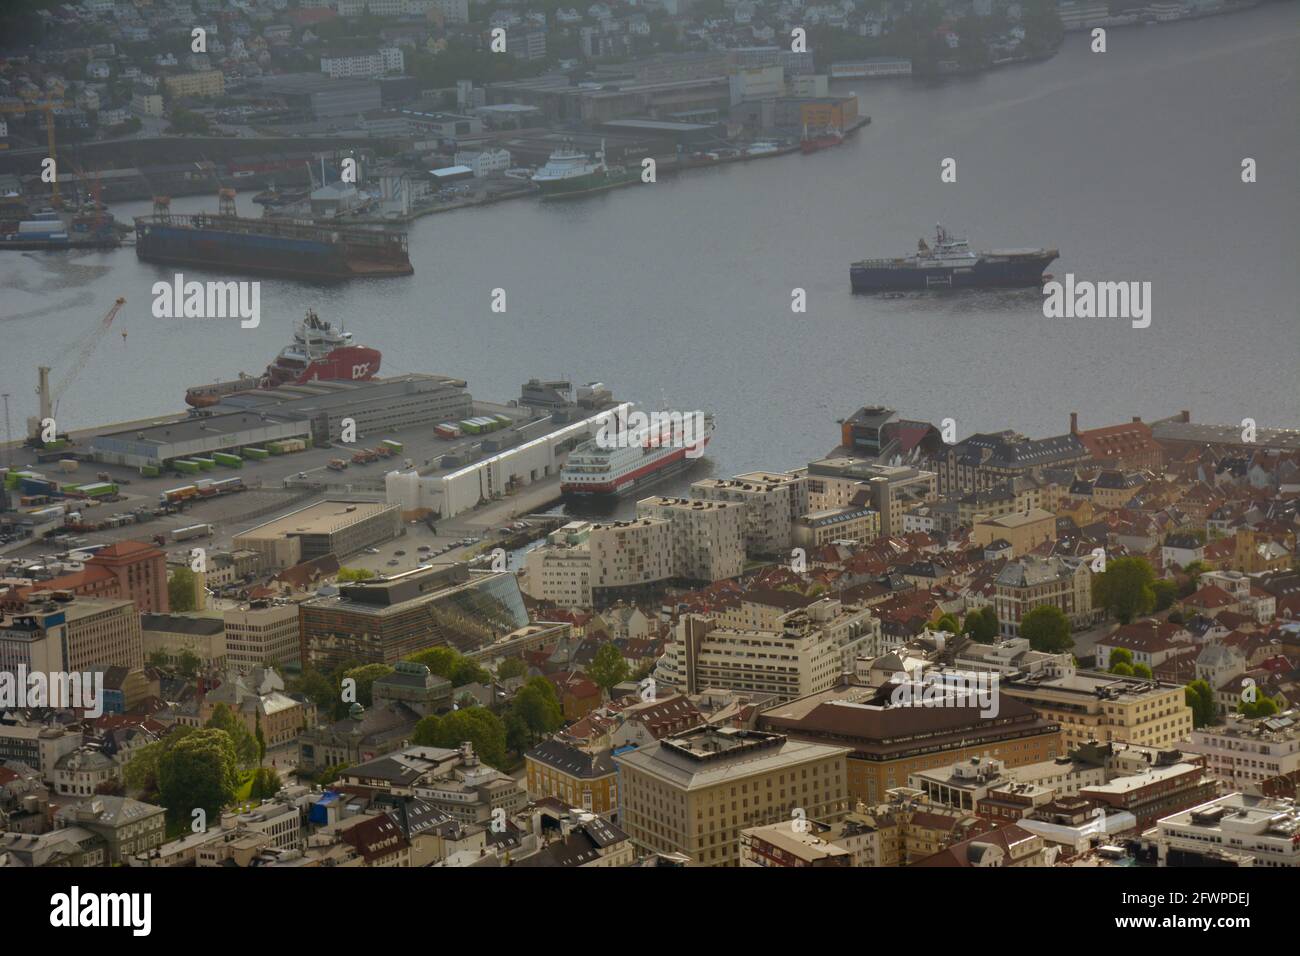 Bergen, Norway - 24th May, 2017: Beautiful close-up view of the city of Bergen from atop Mount Floyen on a hazy summer day. Stock Photo